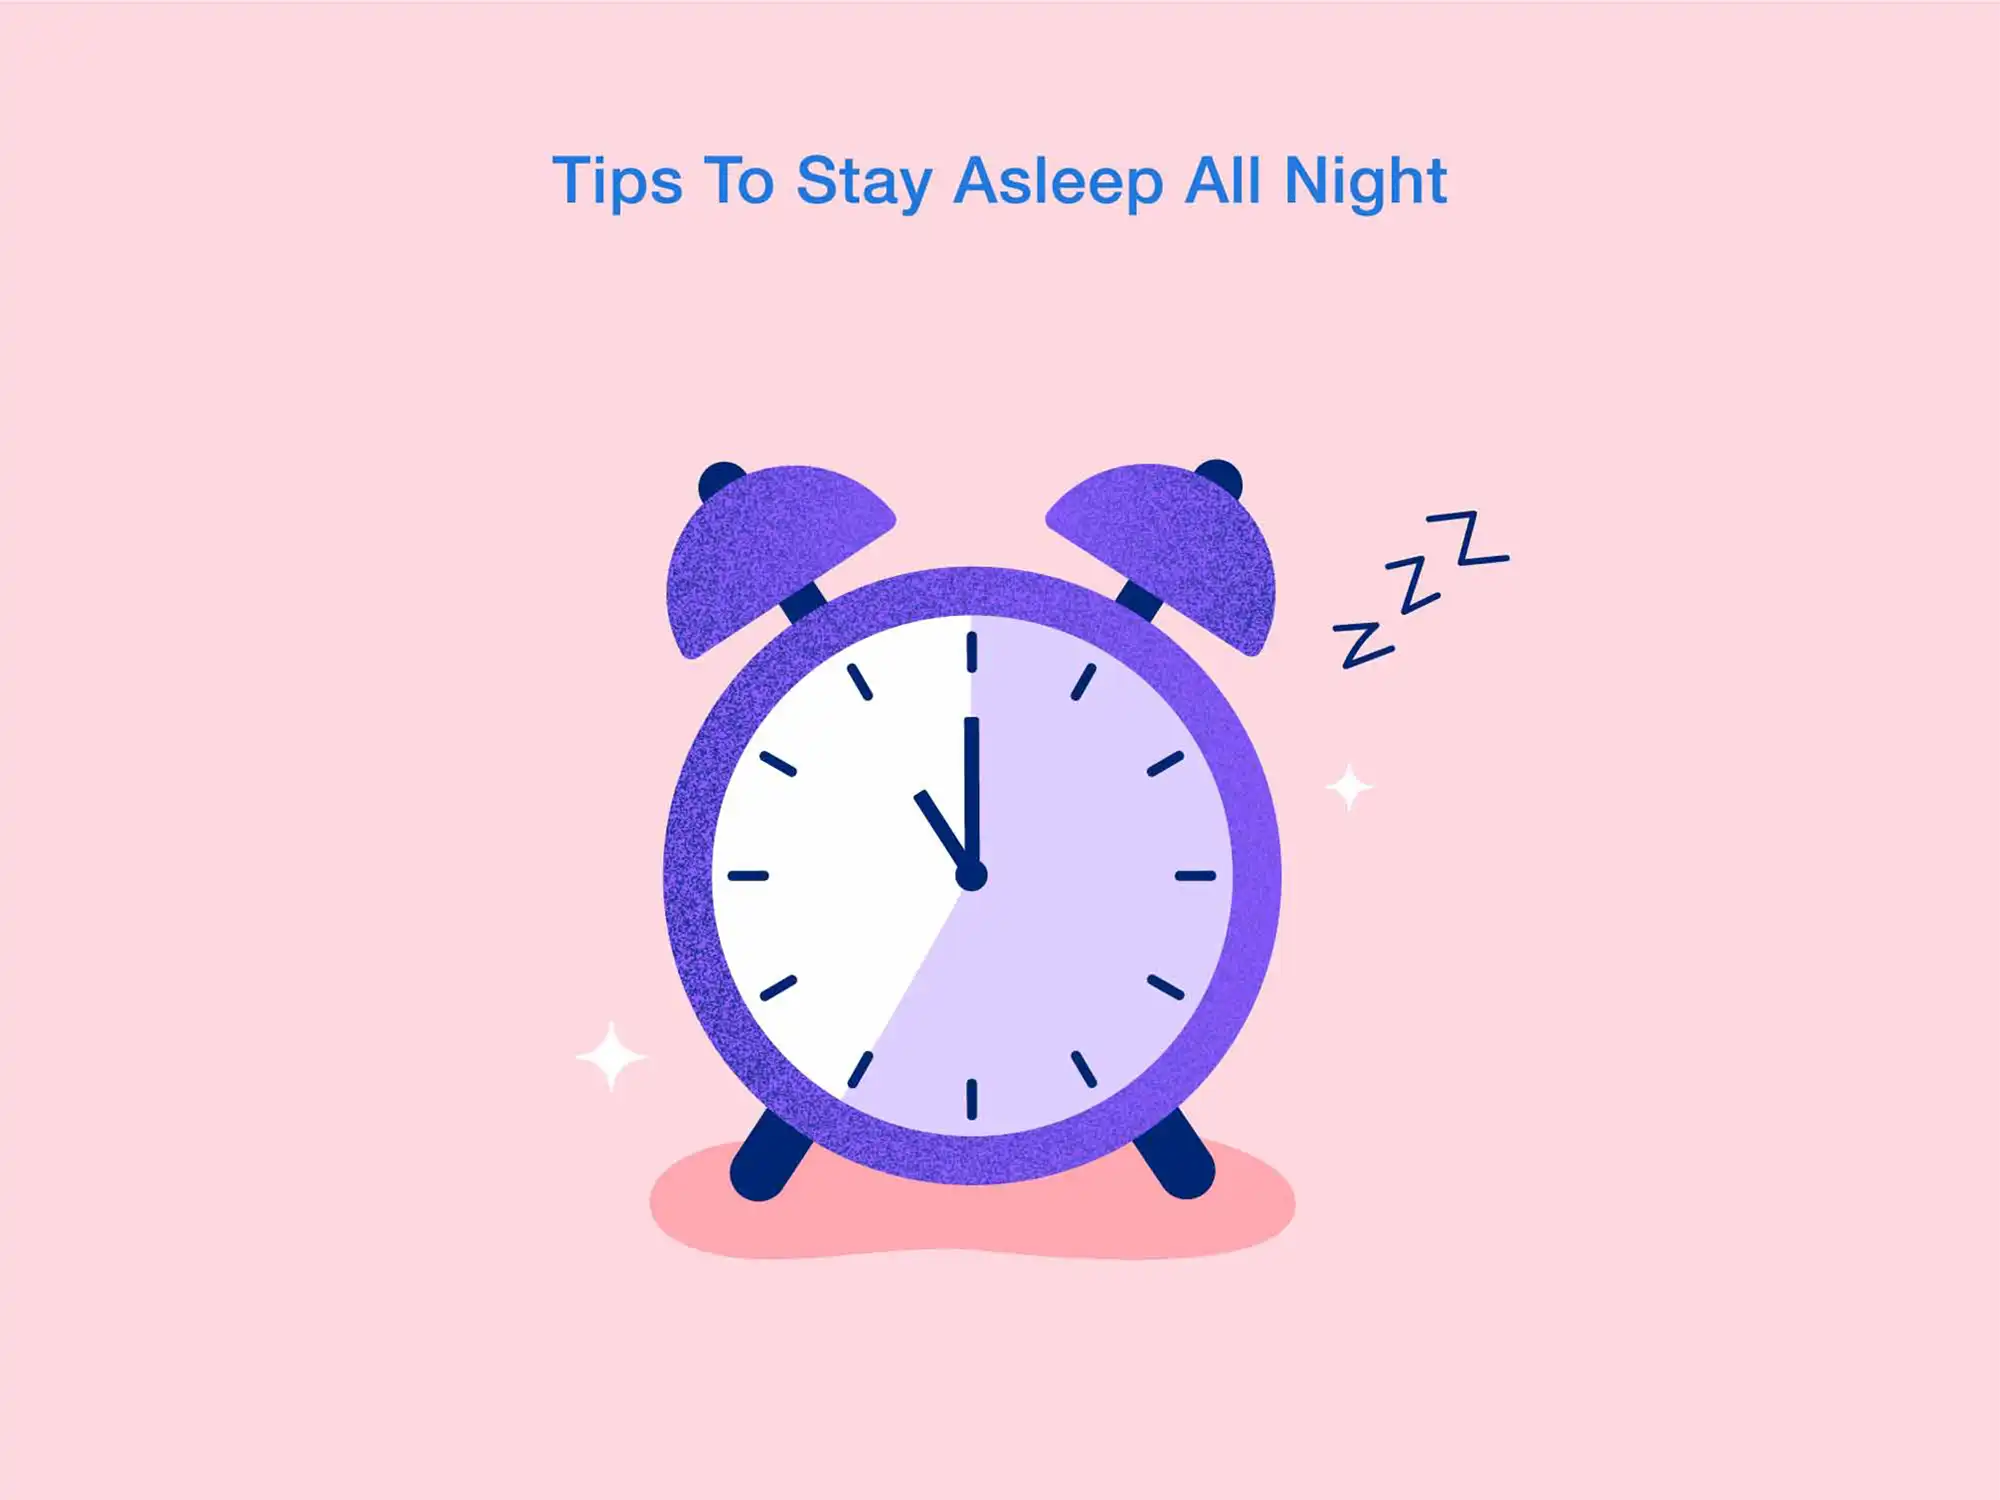 11 tips to Stay Asleep All Night